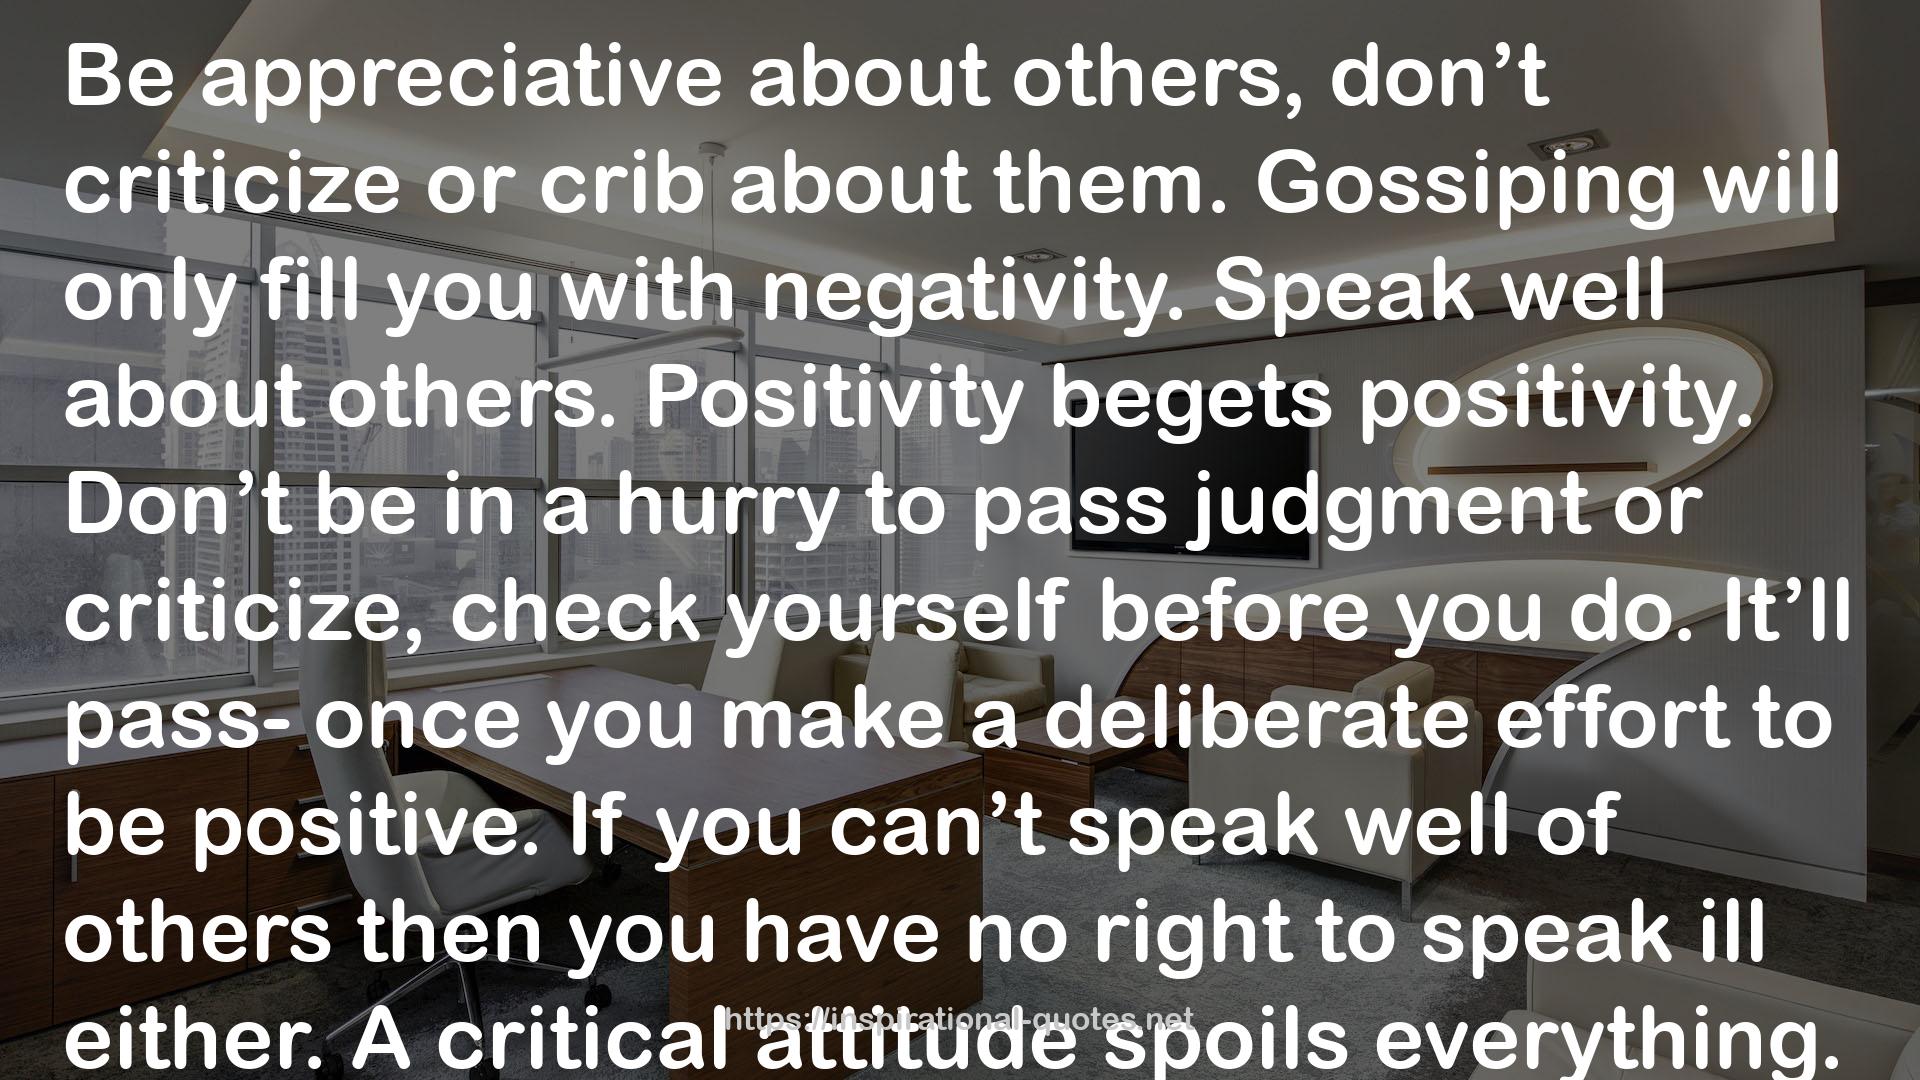 Gossiping  QUOTES